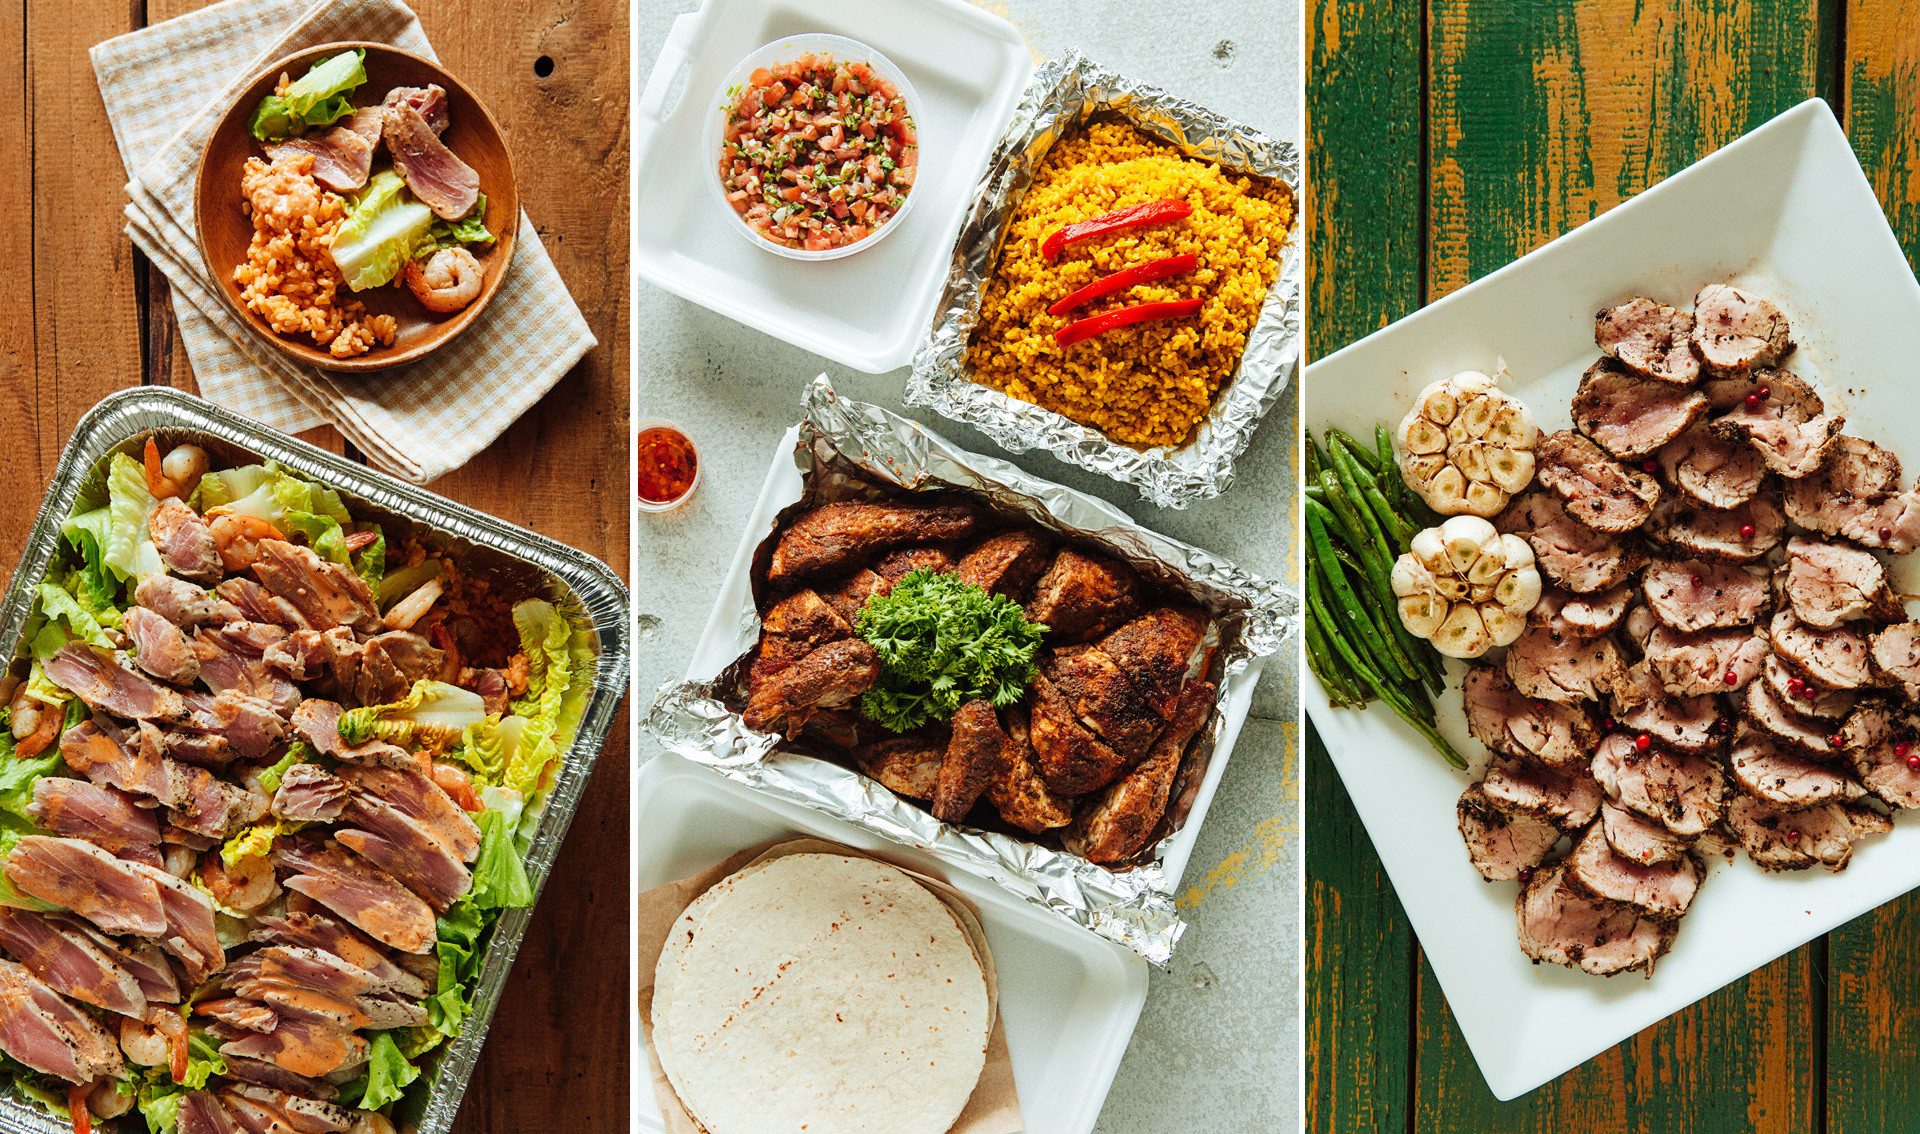 Holiday Party Potluck Ideas
 Here are 7 Take Out Meal Ideas You Can Bring to Your